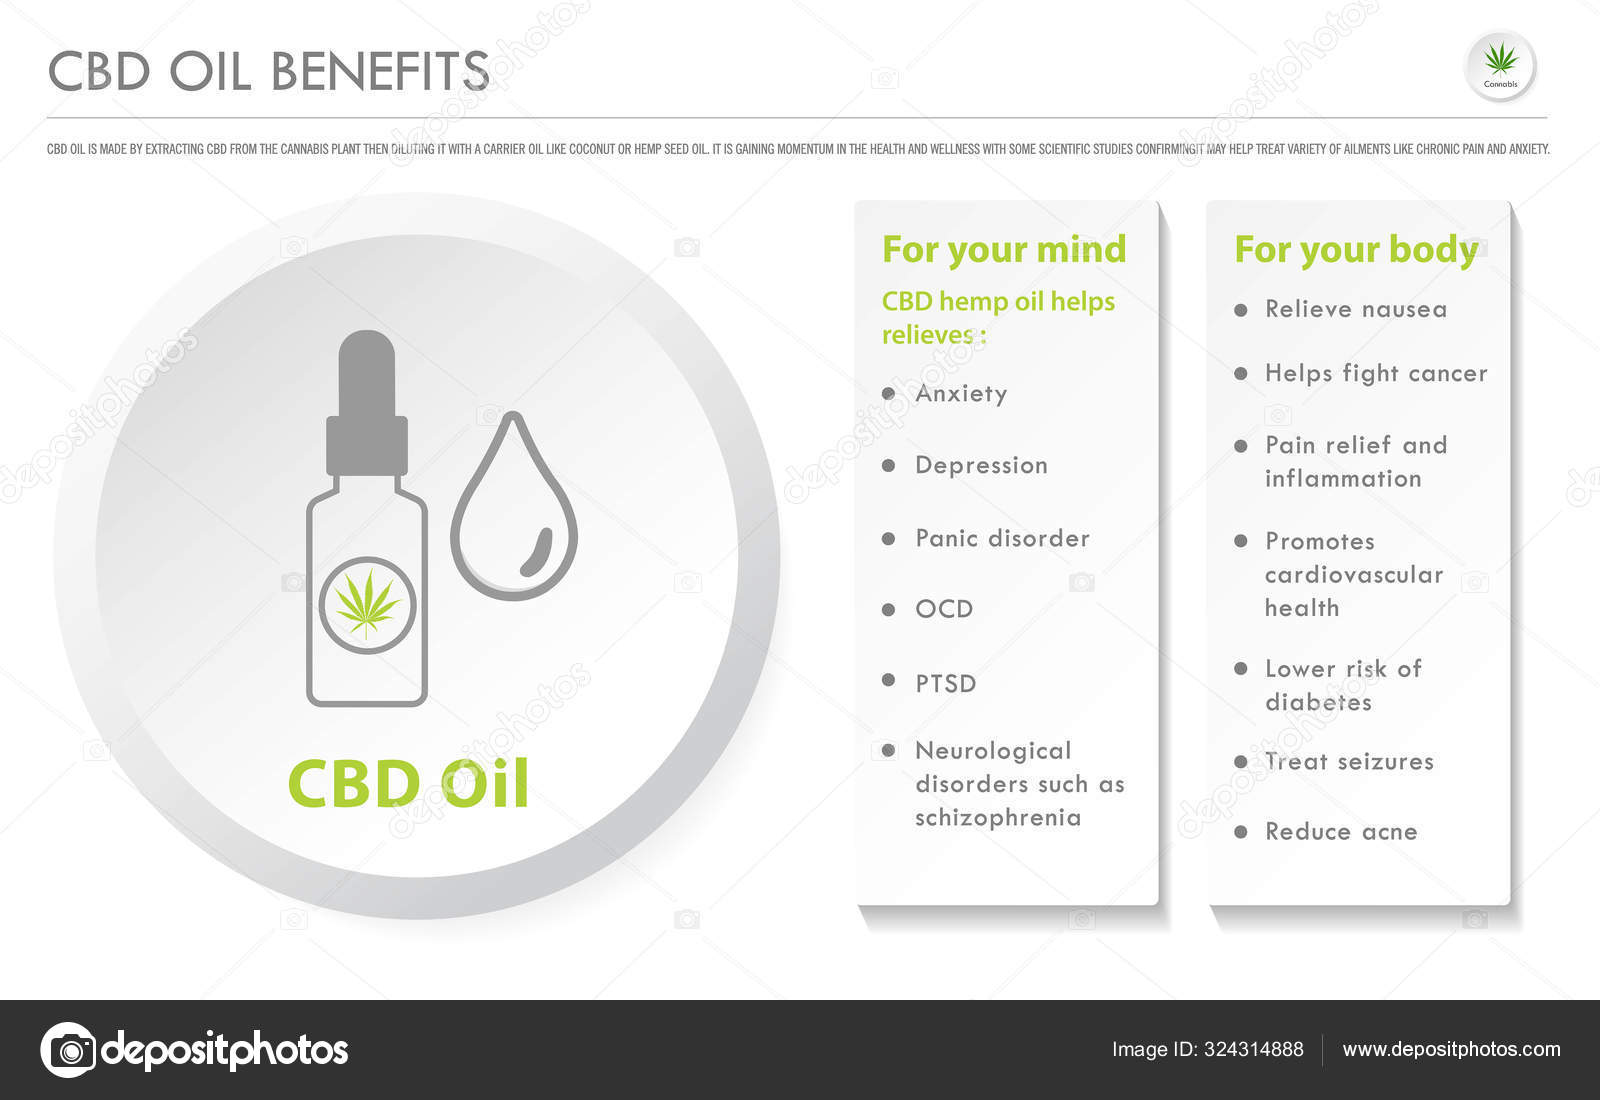 CBD oil: Have the benefits been overstated? - BBC News